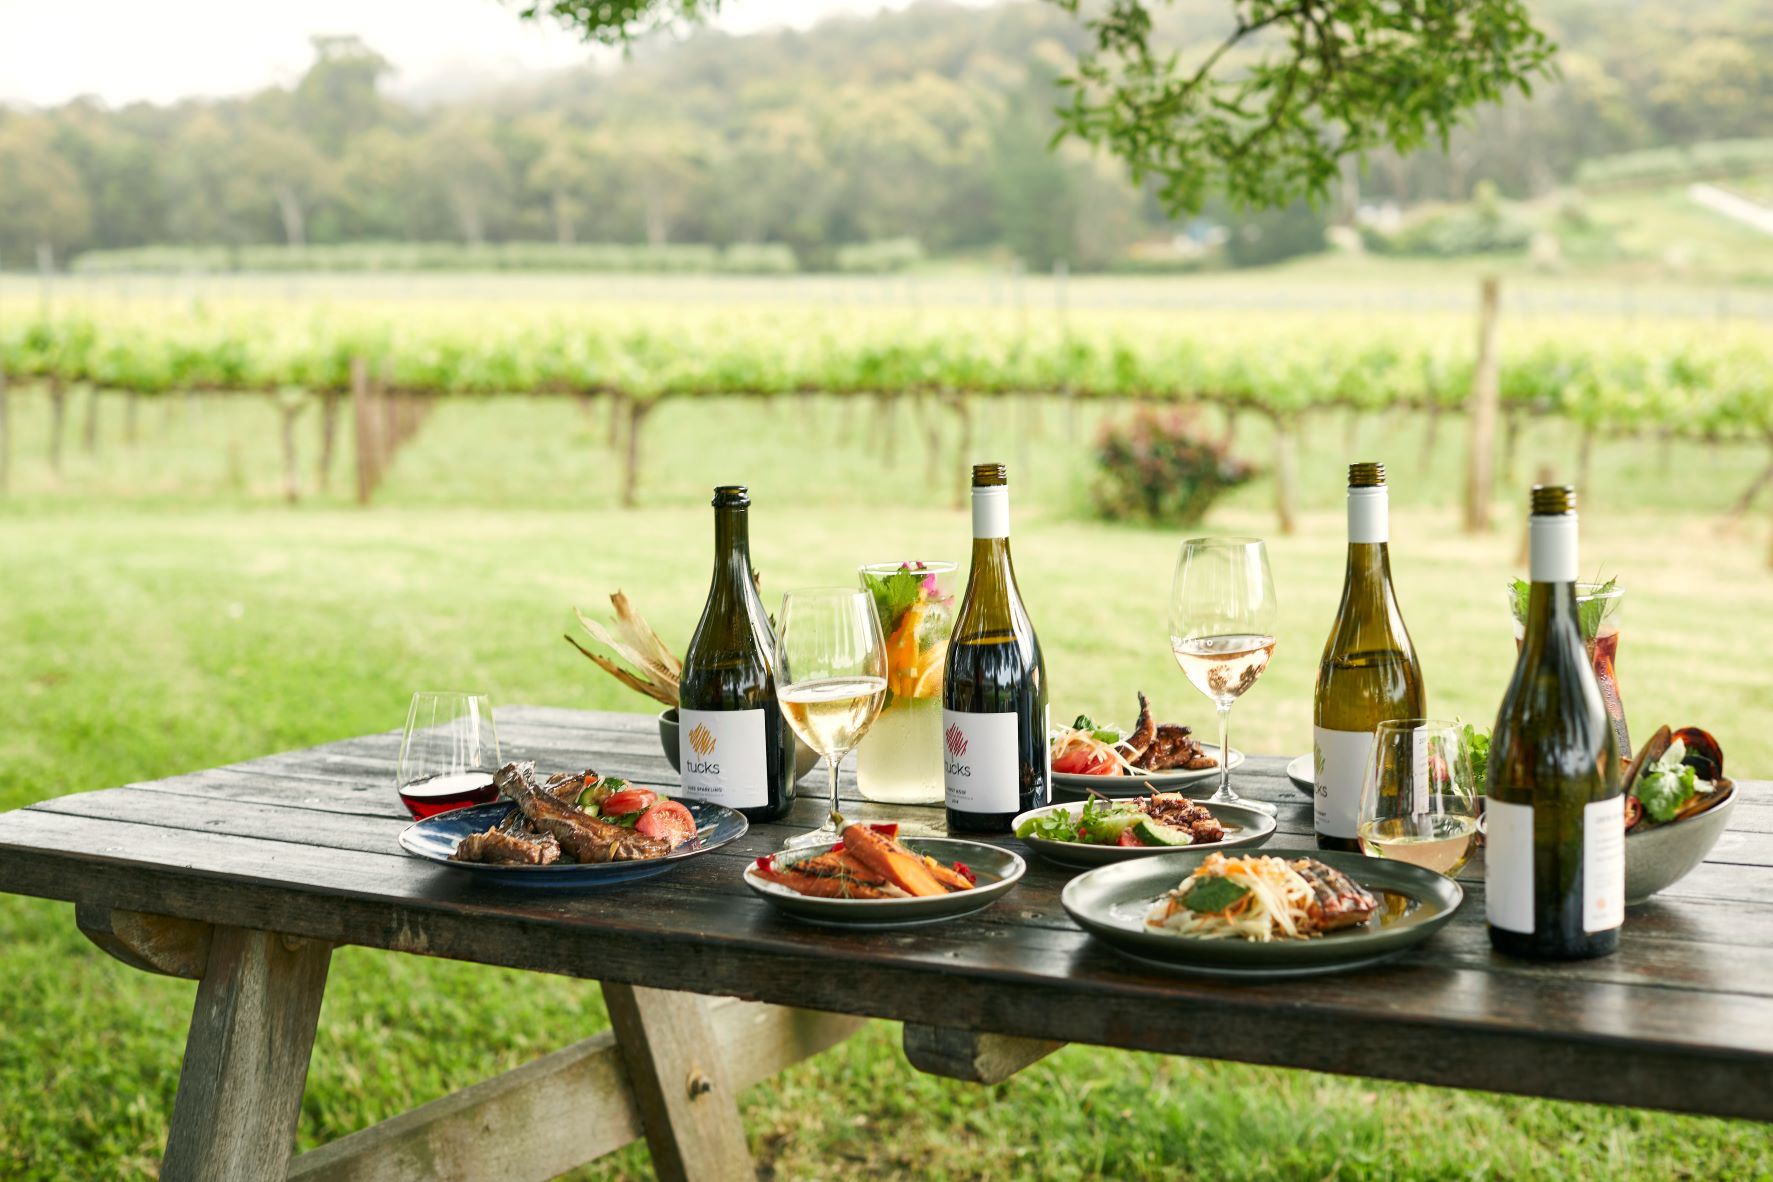 Selection of wine and food at Tucks on an outdoor picnic table with vineyards in the distance.